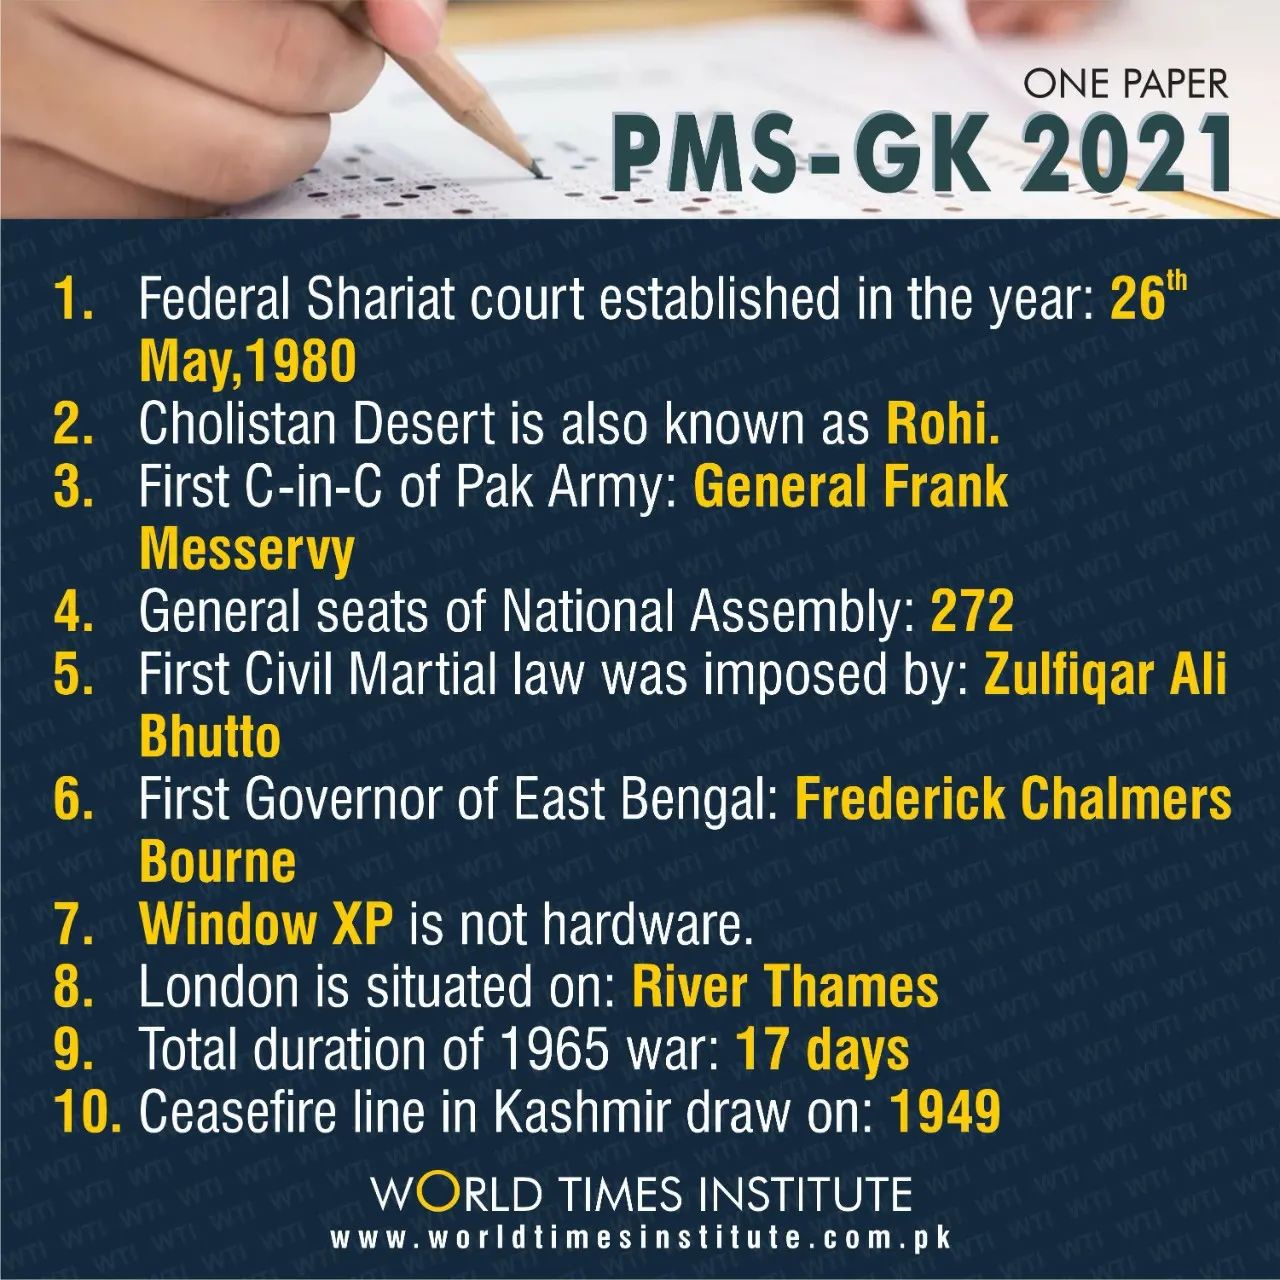 You are currently viewing ONE PAPER PMS-GK 2021 27-07-2022